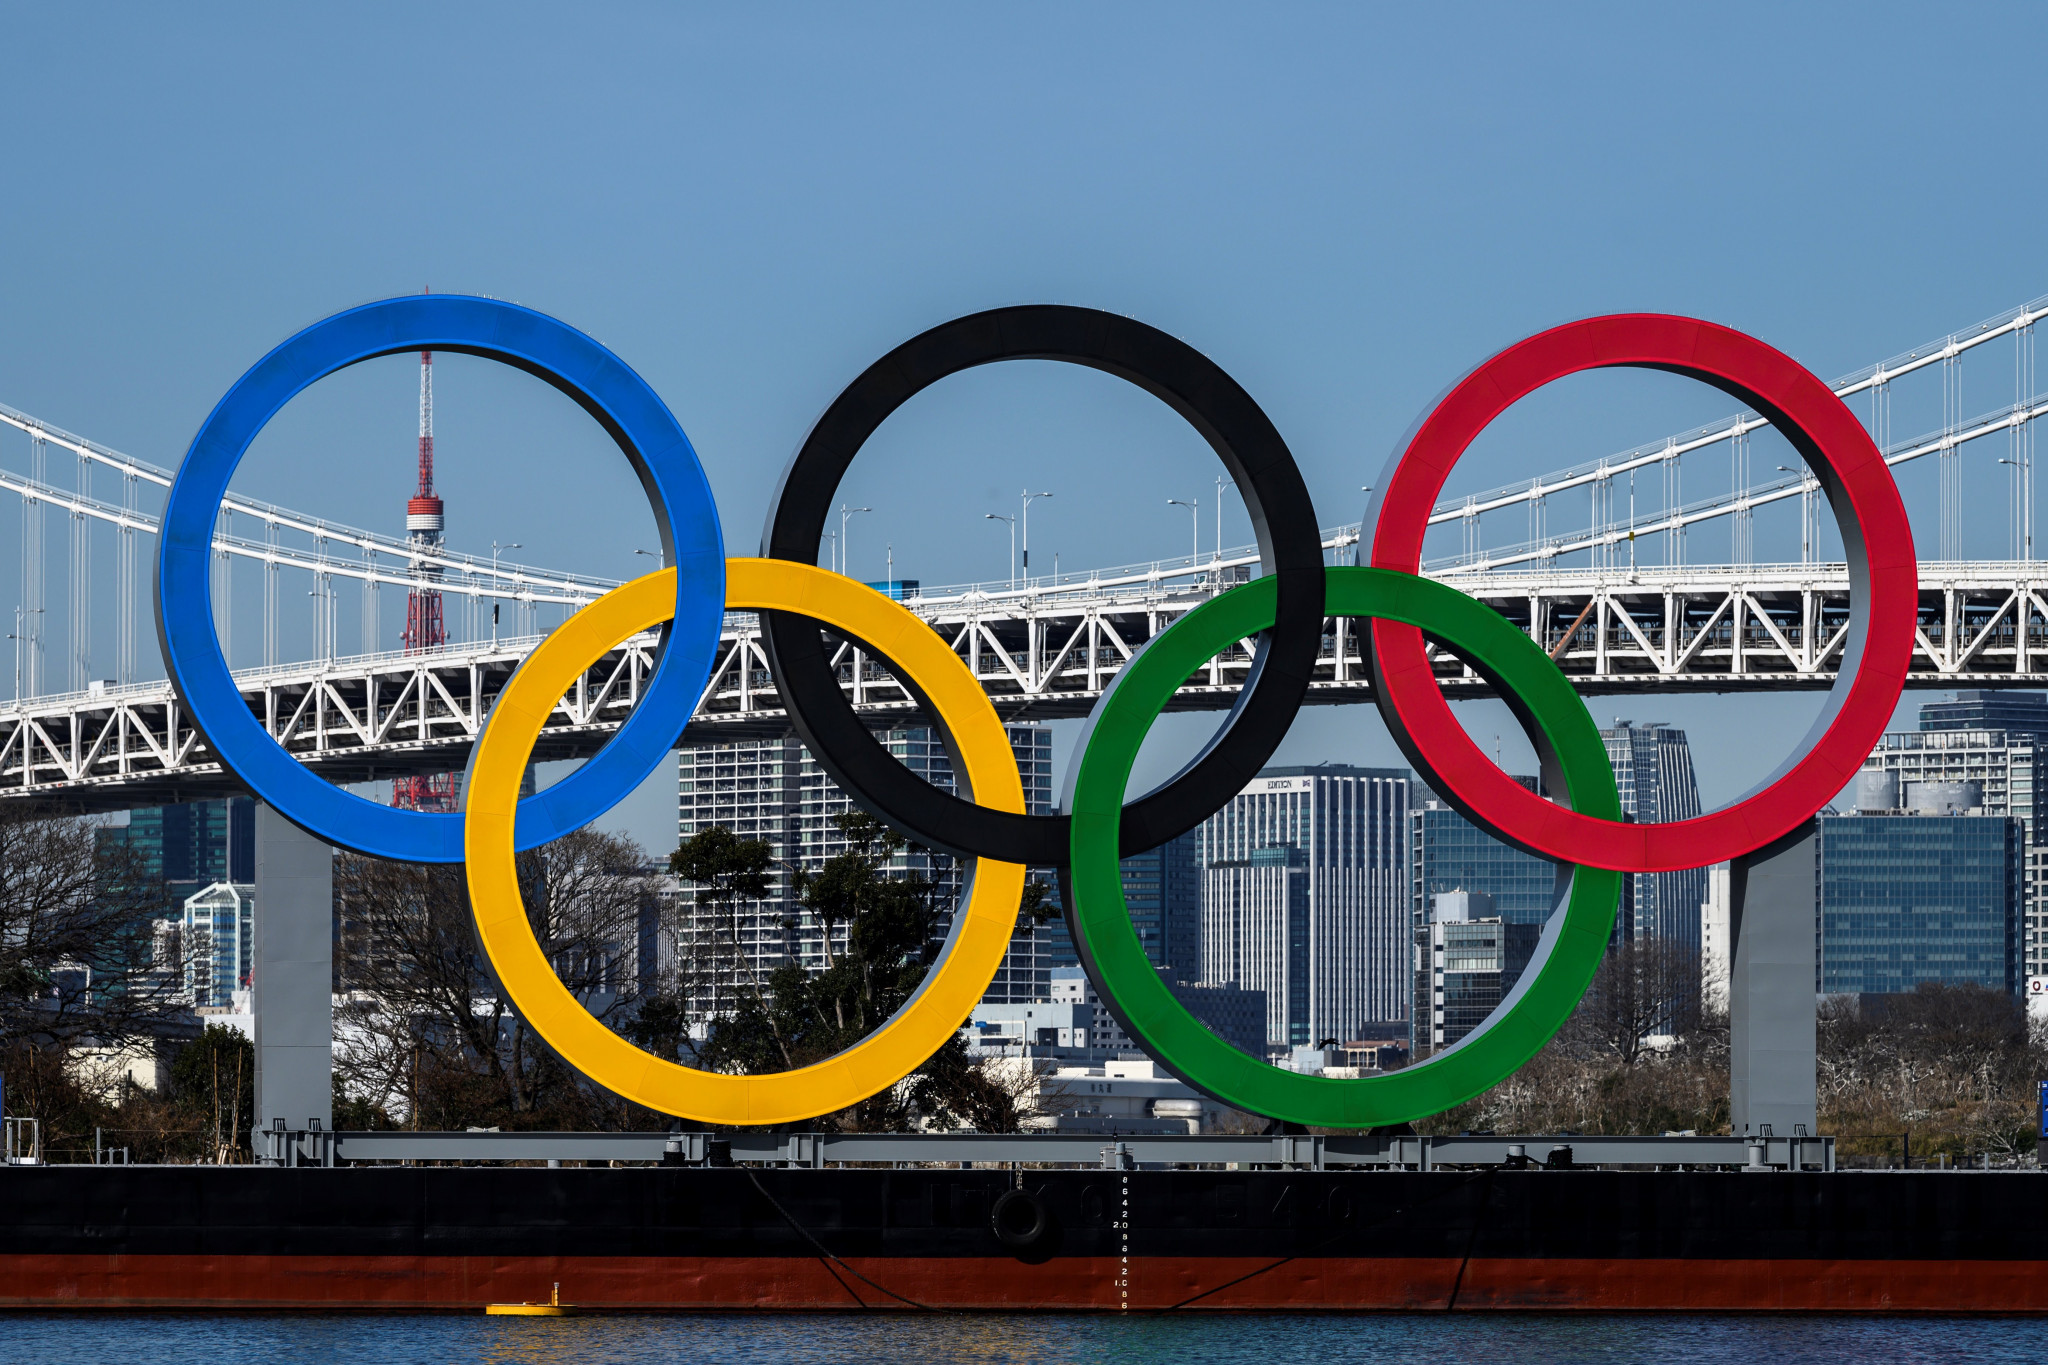 The Tokyo 2020 Candidate Selection Committee has set criteria for a new President ©Getty Images